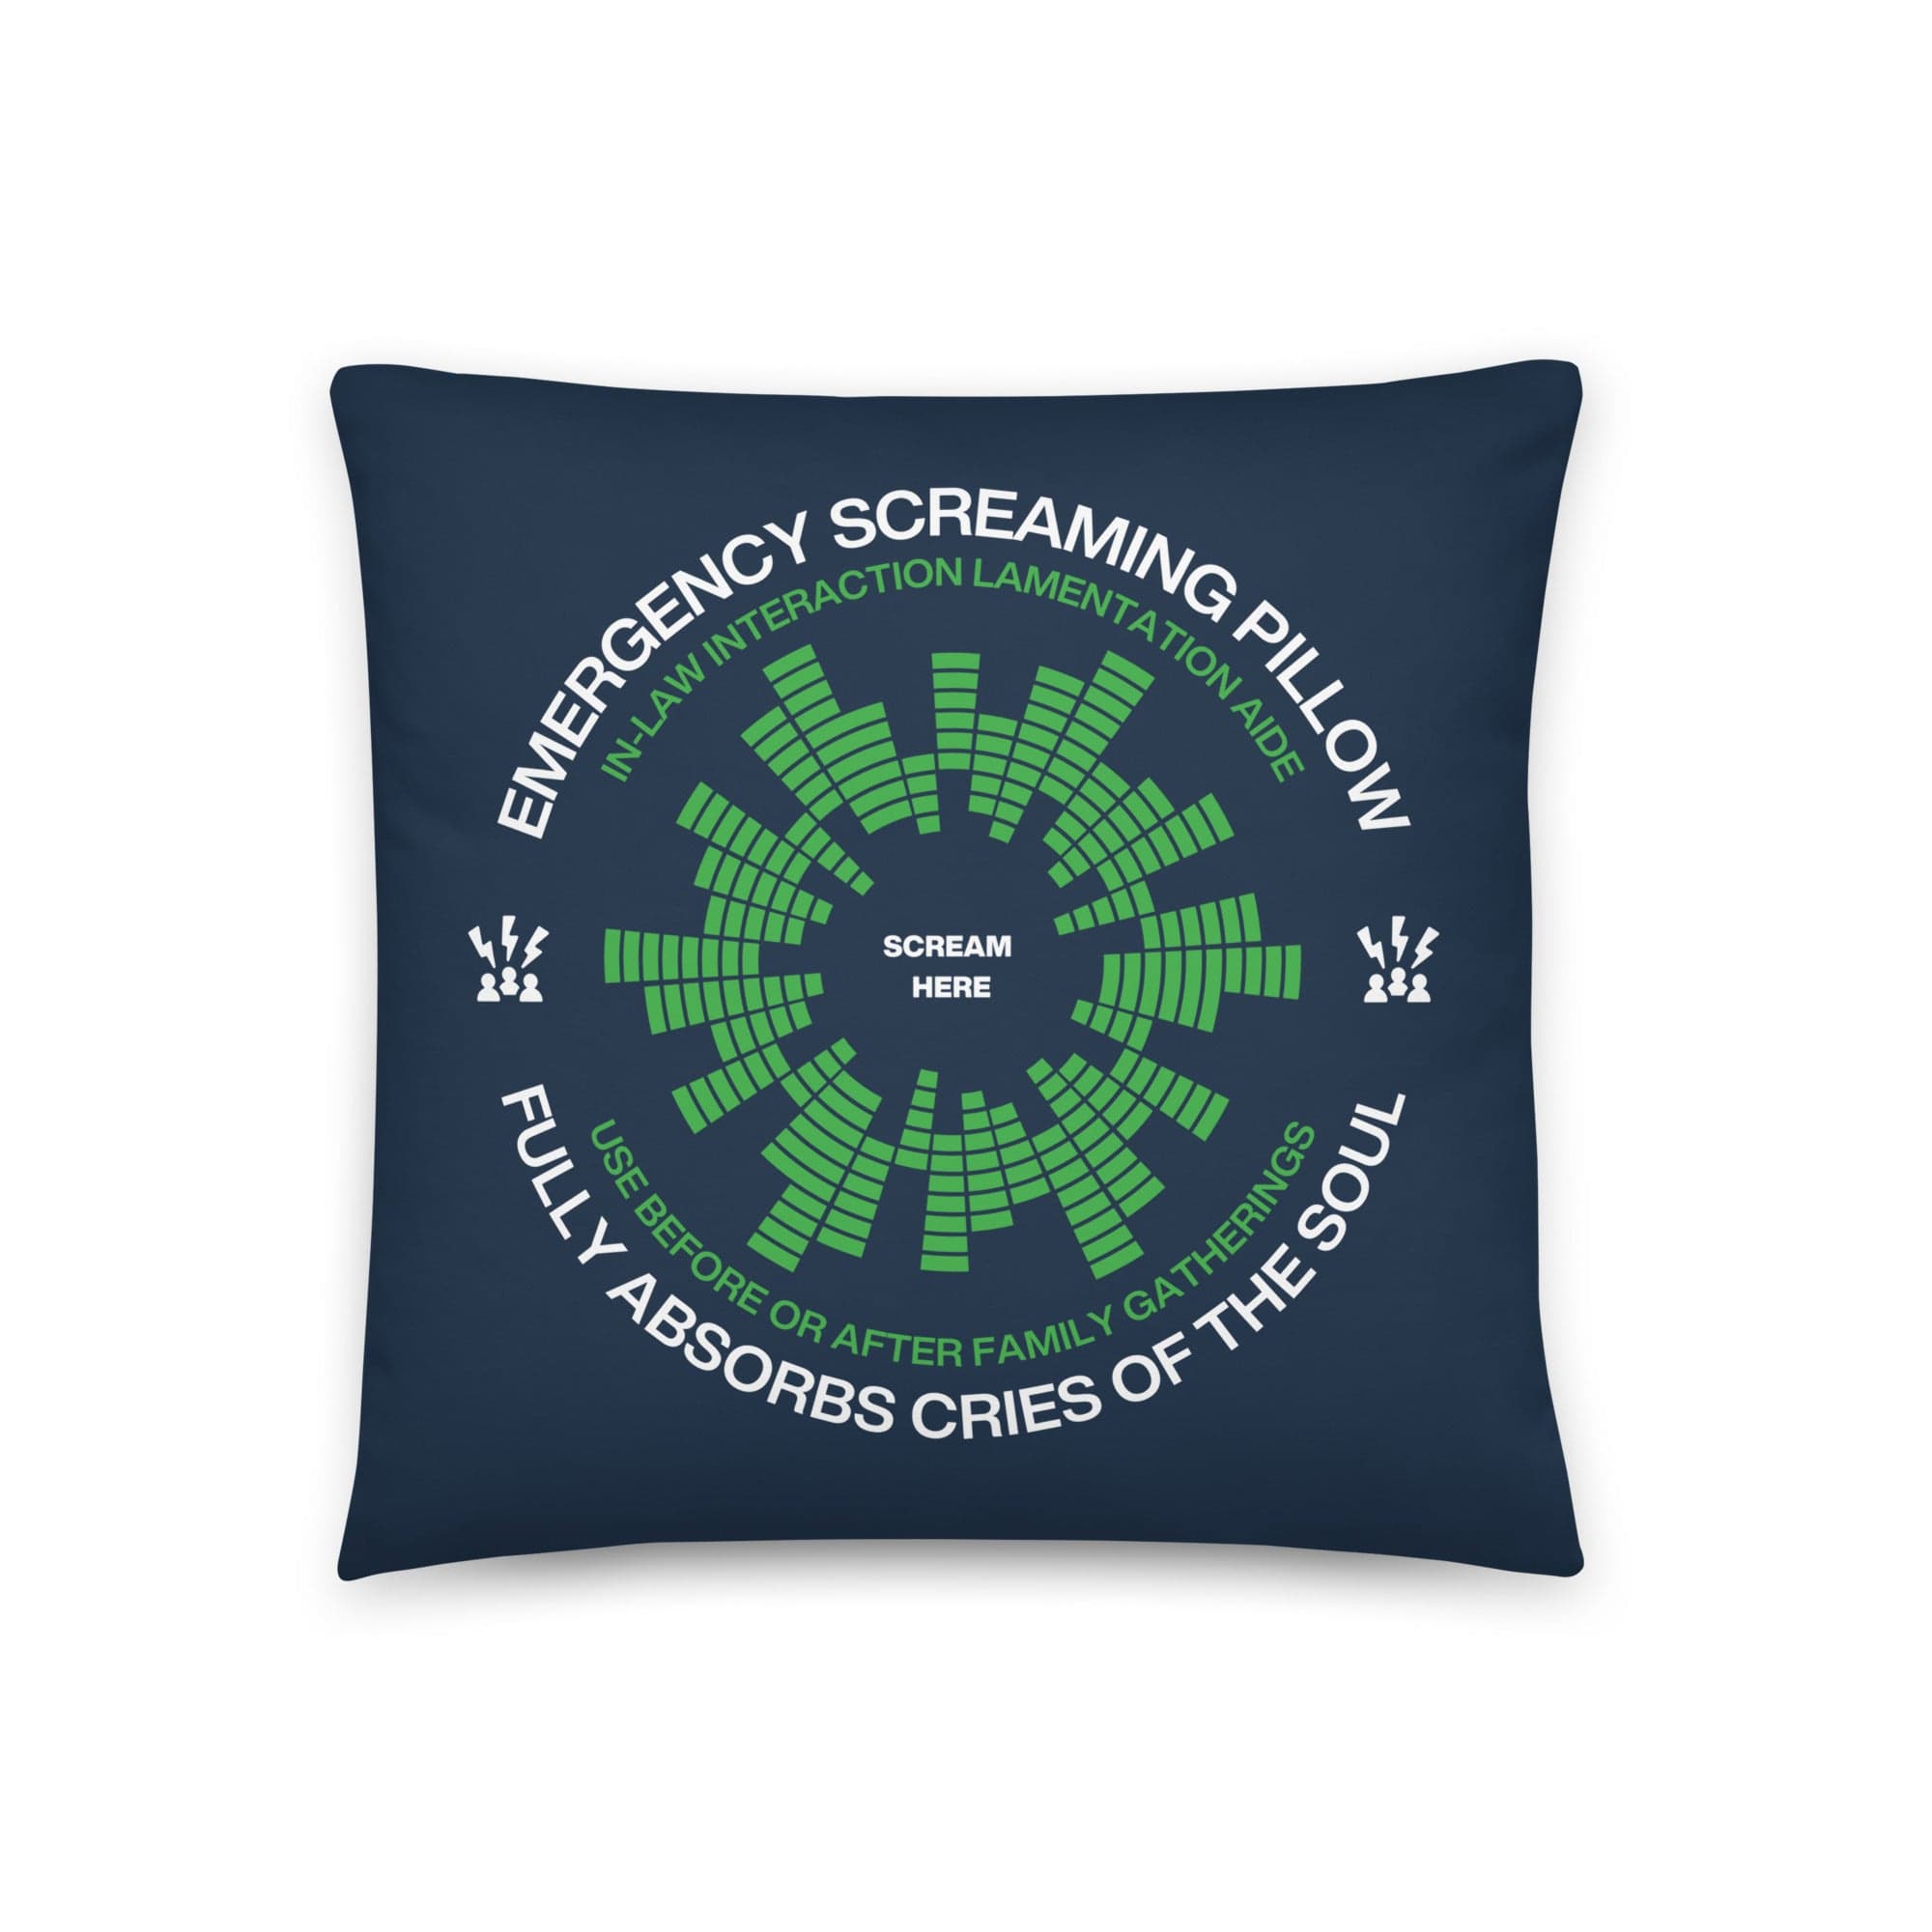 Emergency Screaming Pillow | In-Law Edition Pillow Jolly & Goode